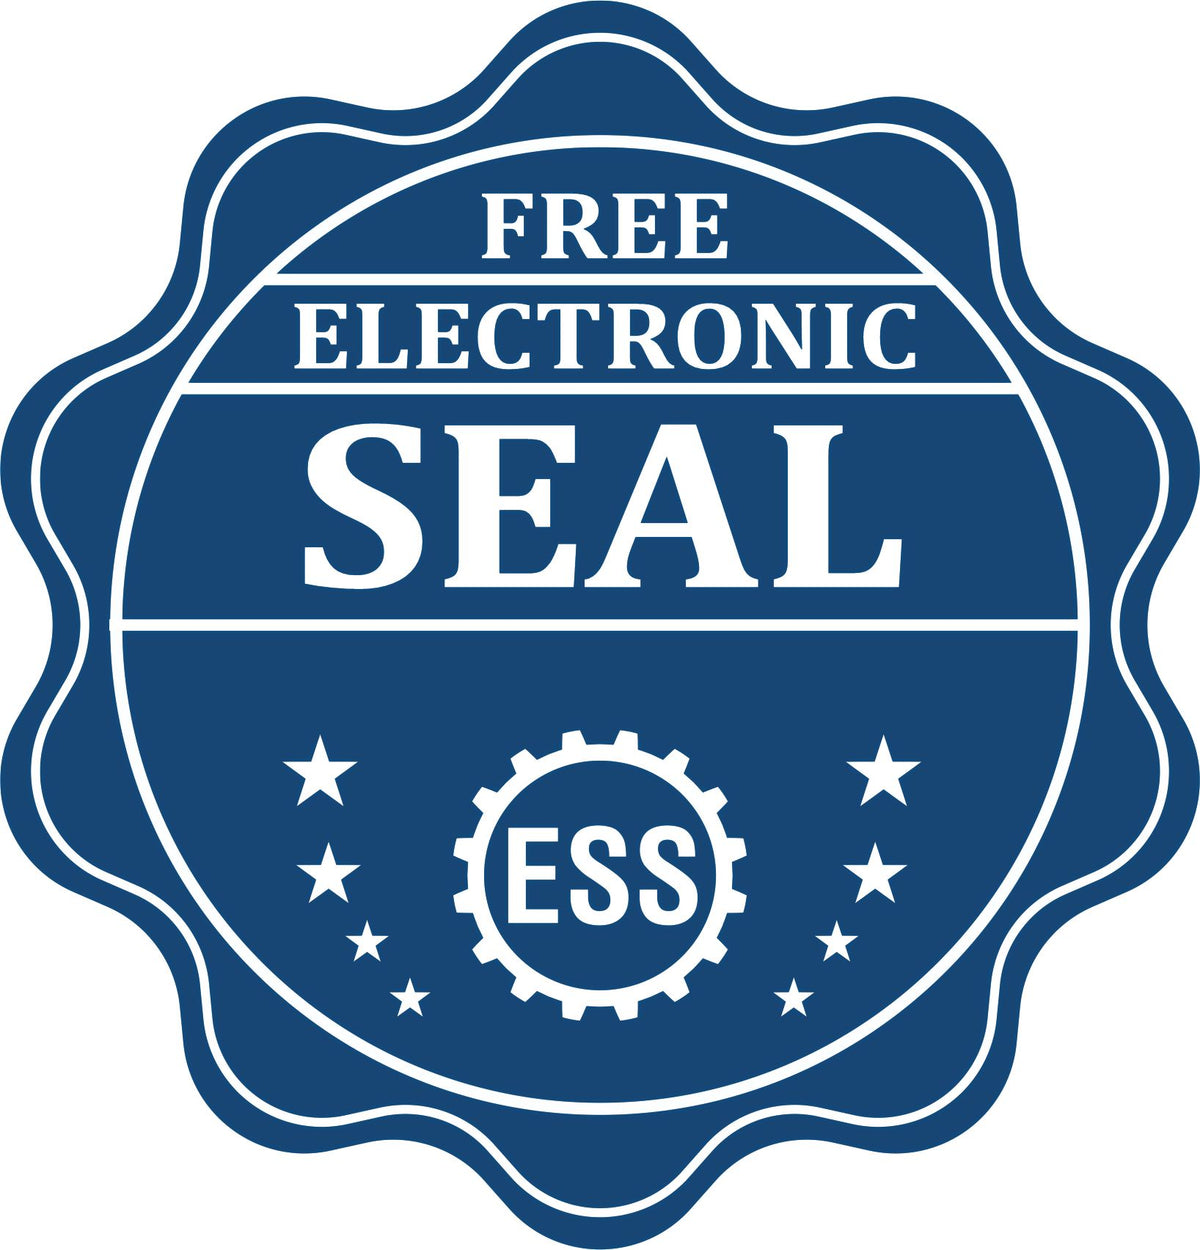 A badge showing a free electronic seal for the Heavy Duty Cast Iron Mississippi Architect Embosser with stars and the ESS gear on the emblem.